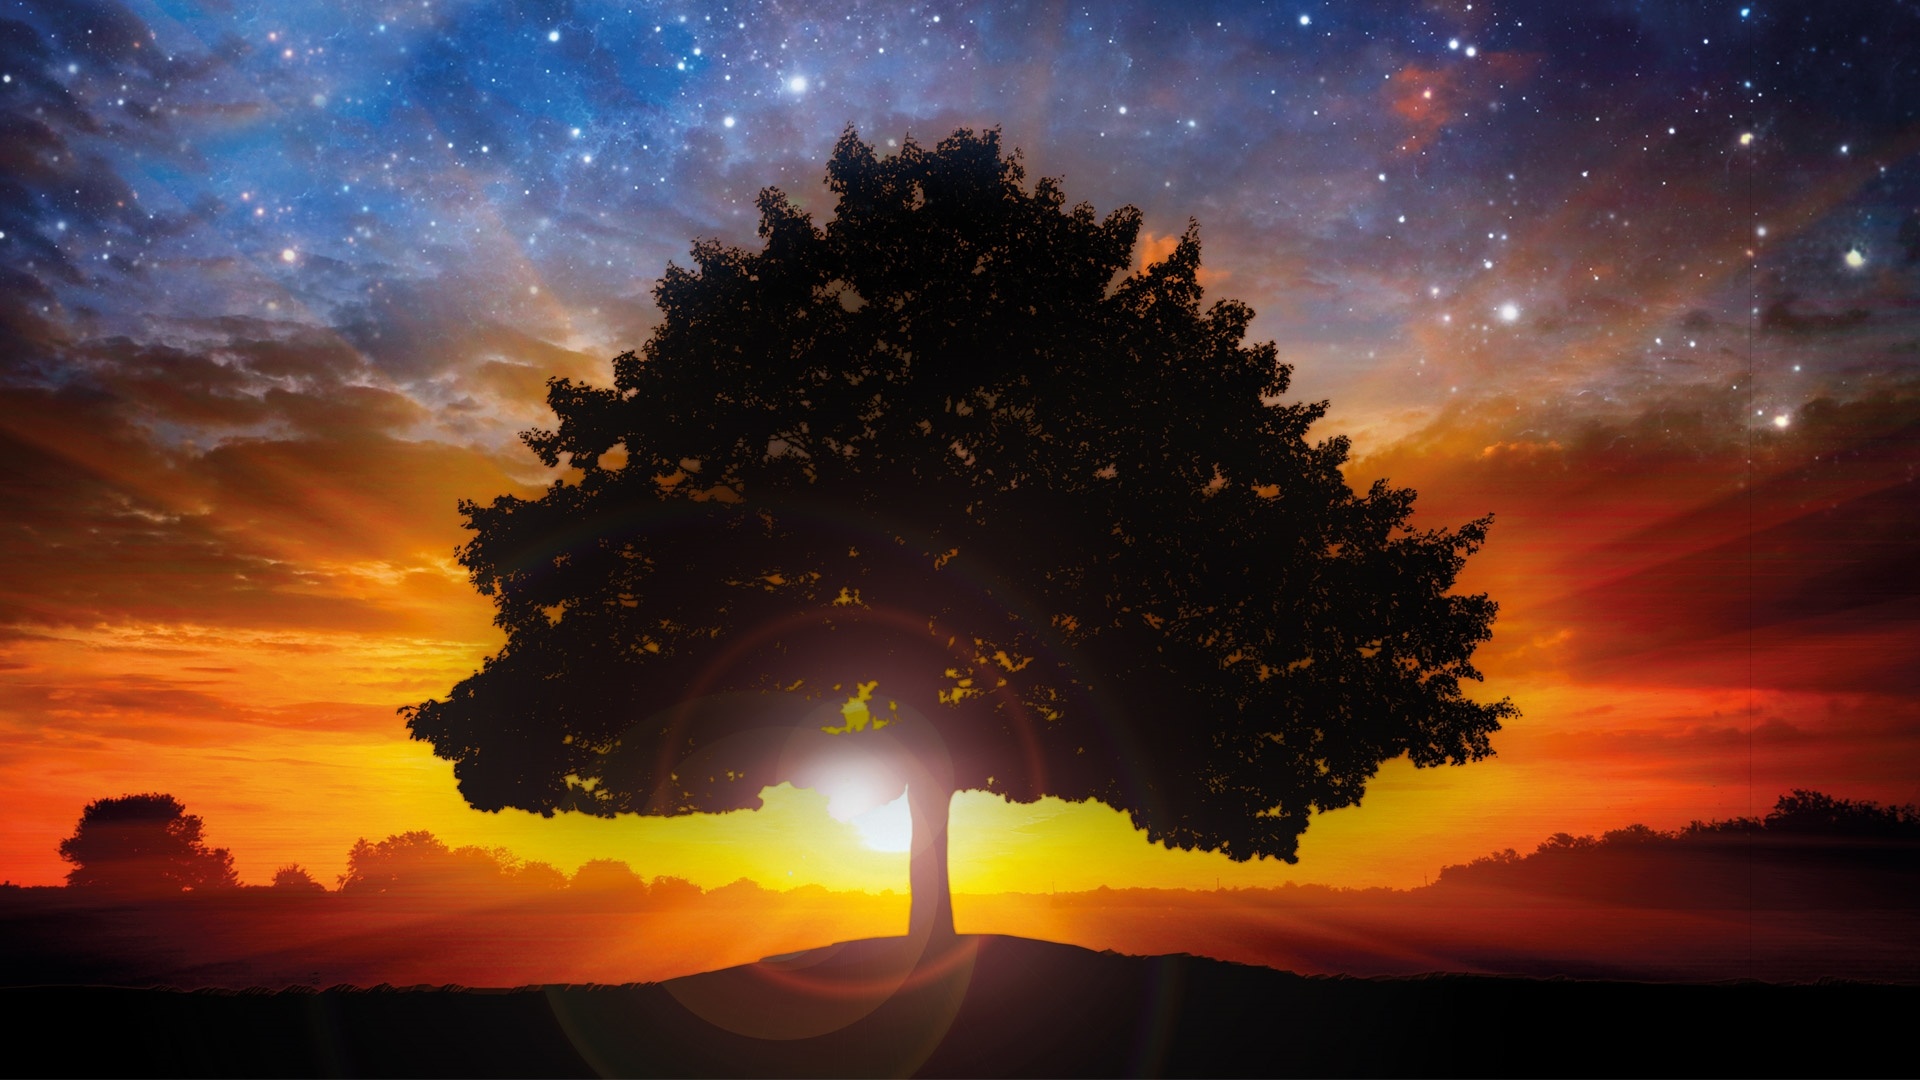 Tree And Space wallpaper for pc